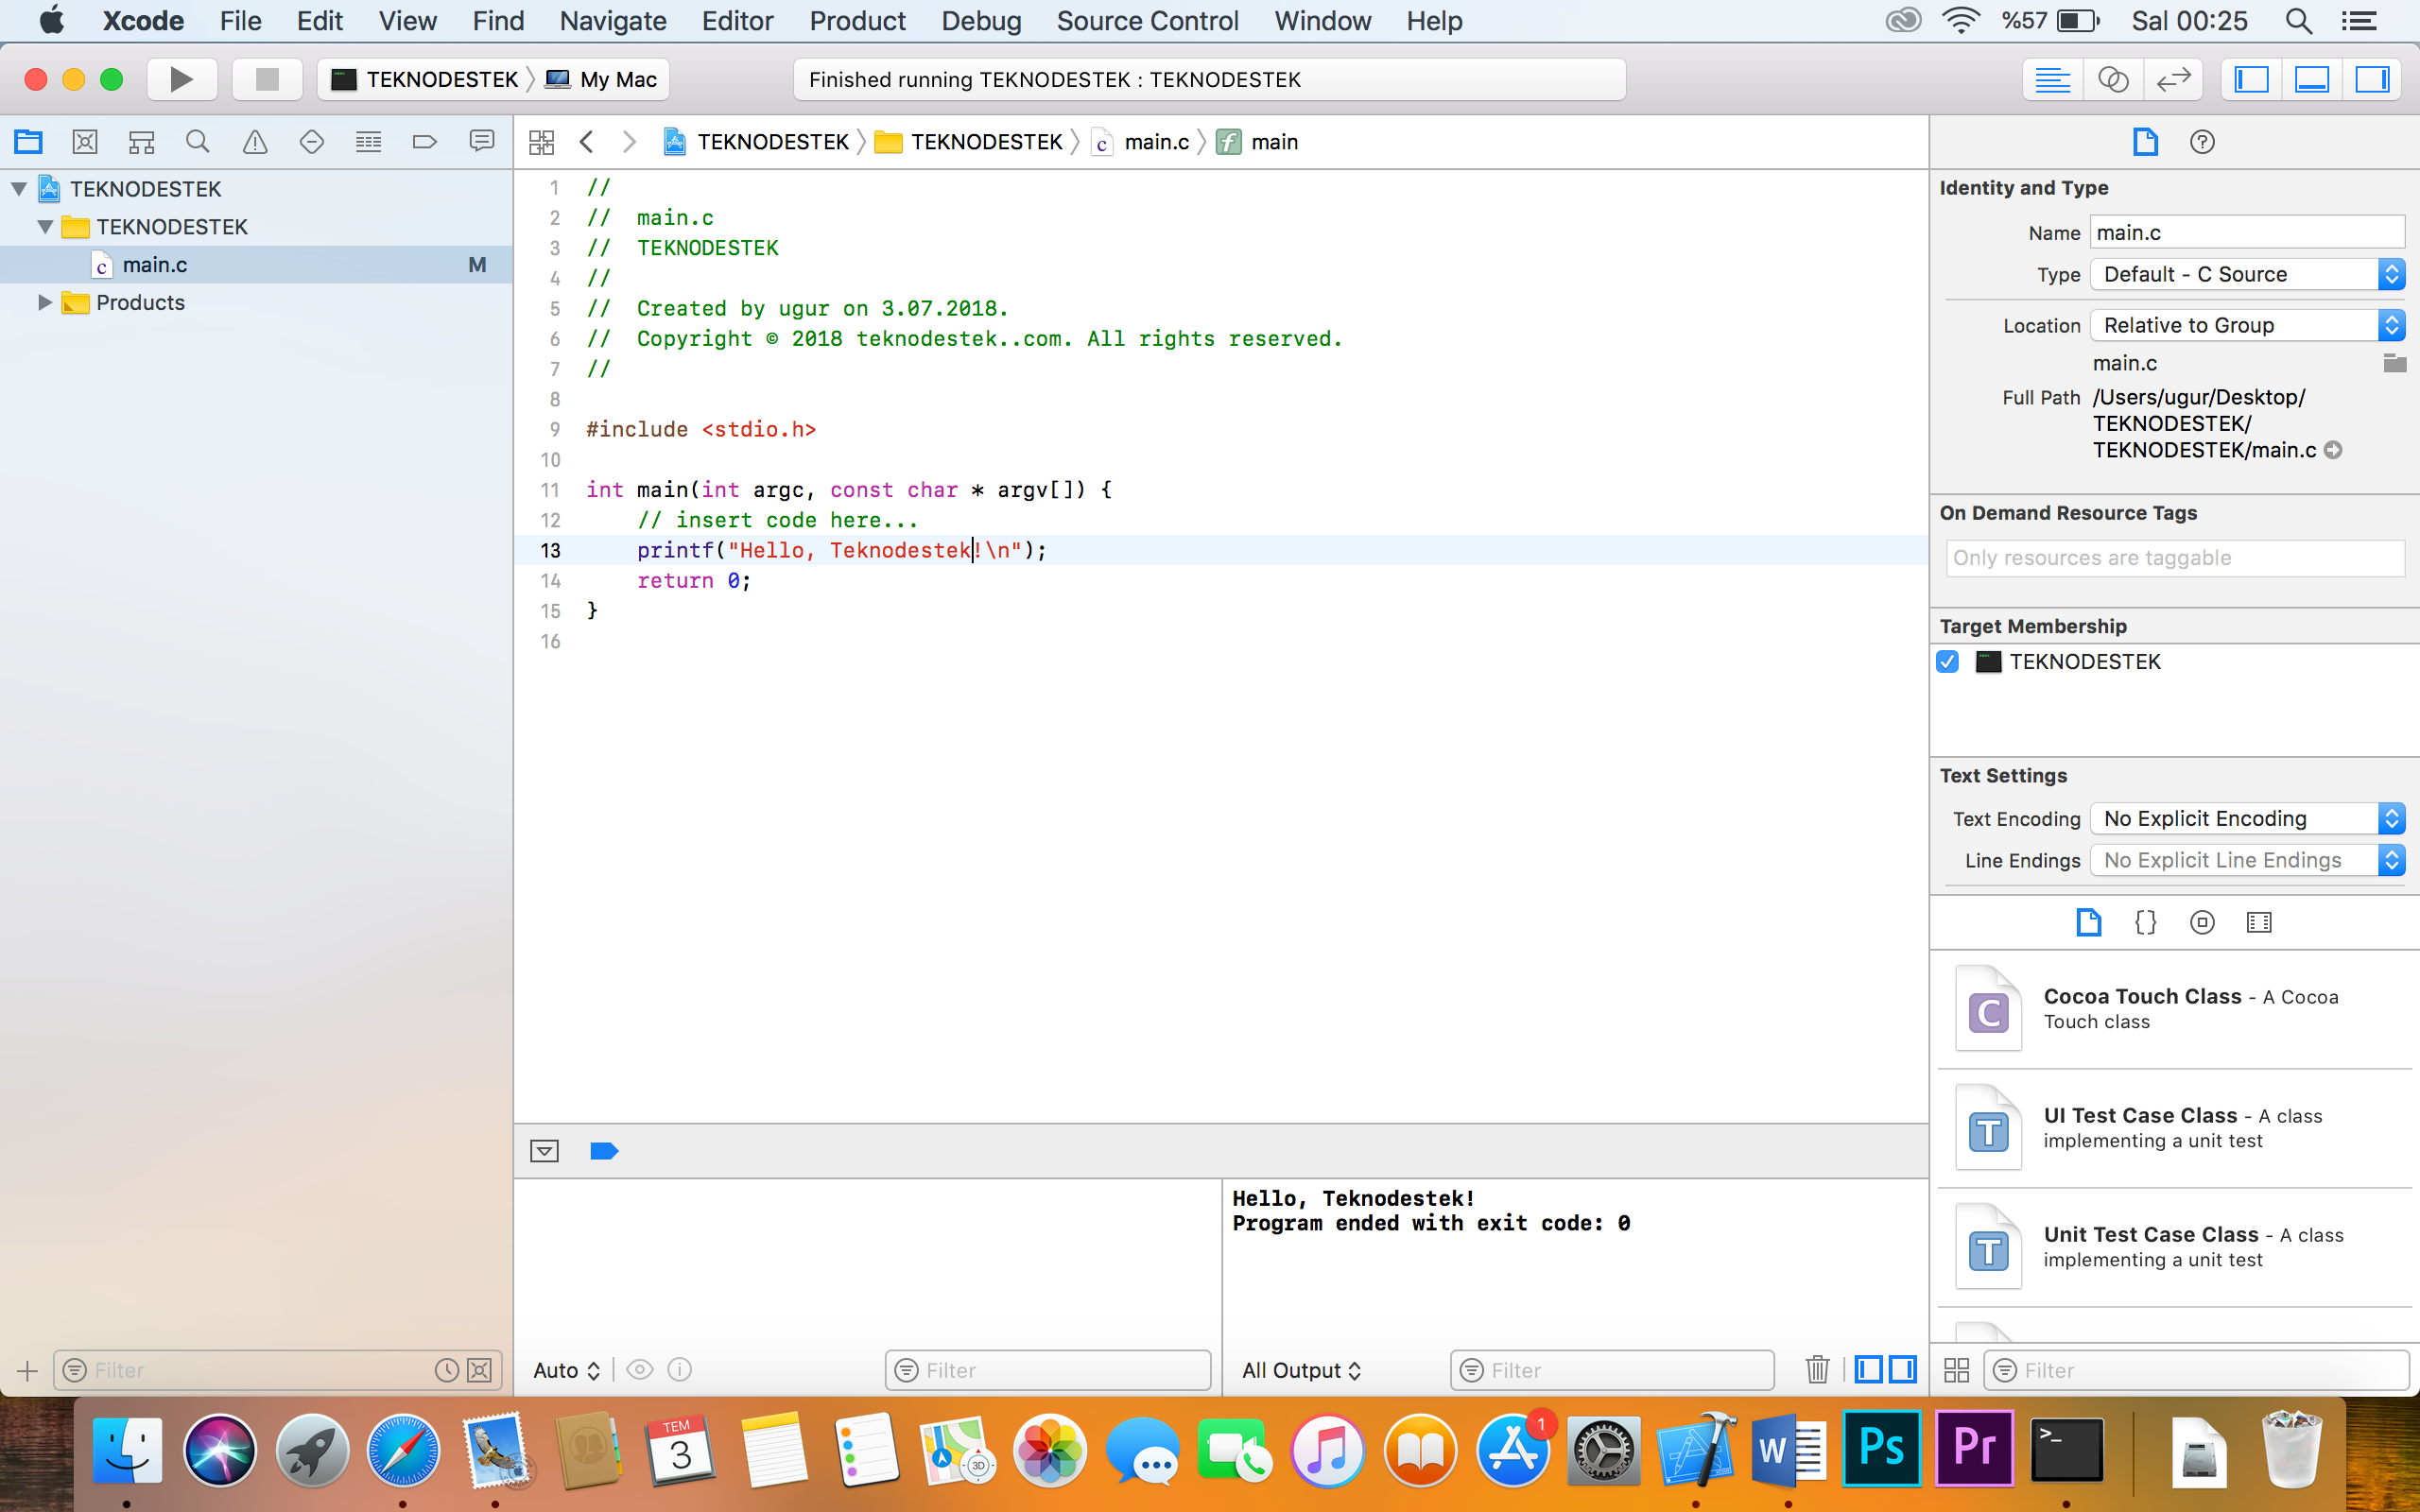 how to use xcode for c programming